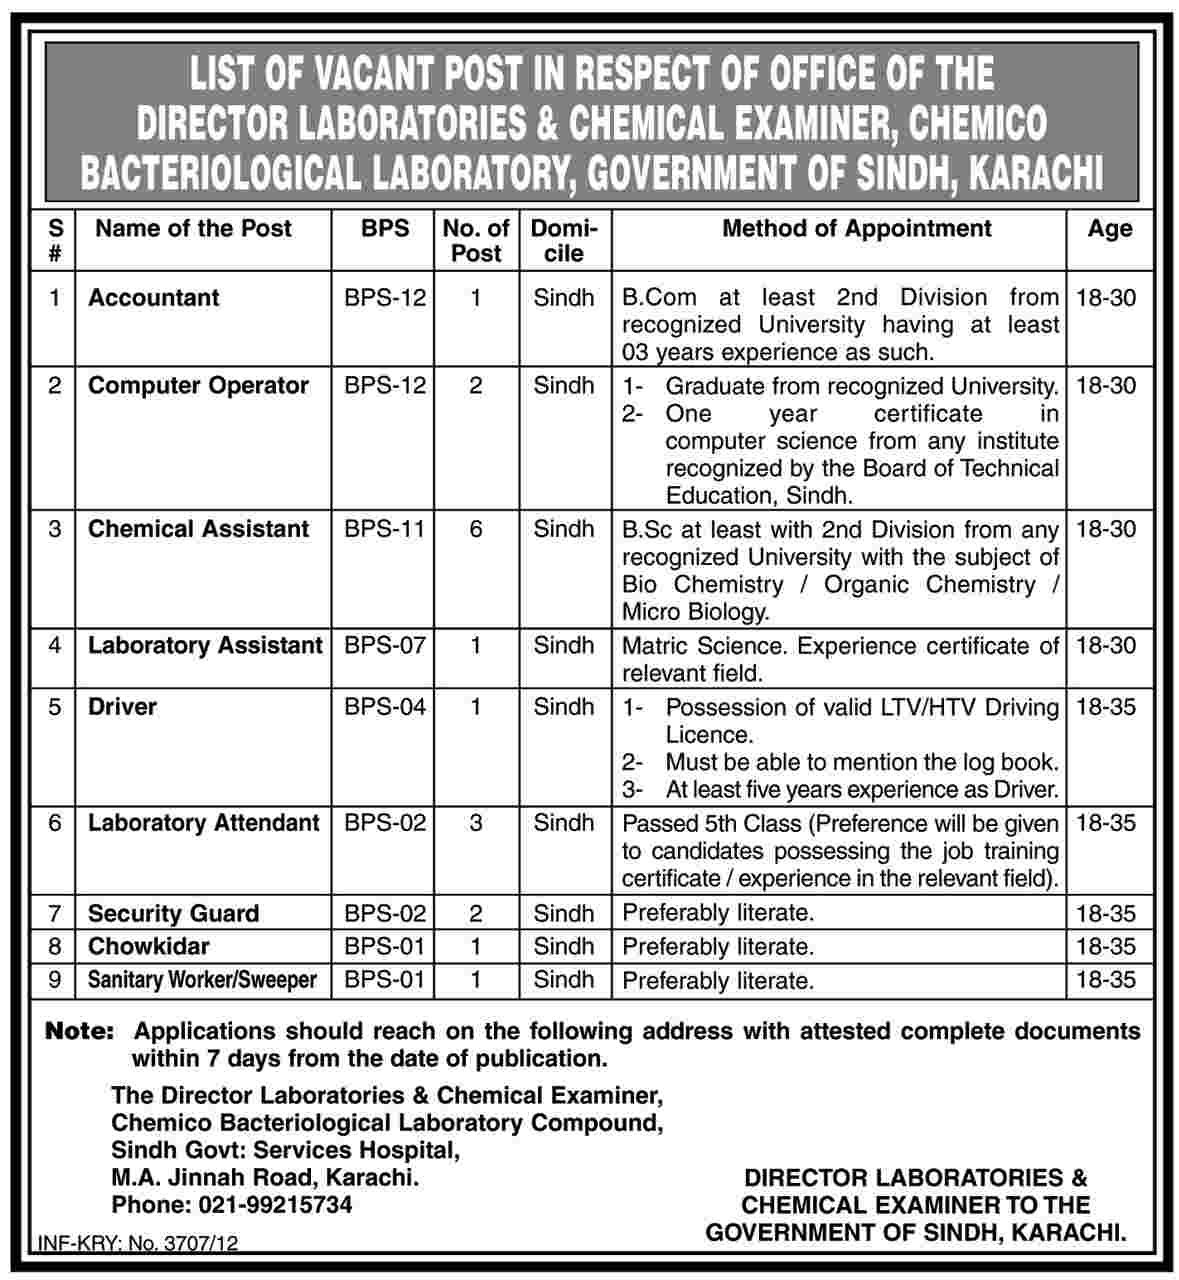 Chemico Bacteriological Laboratory Government of Sindh Jobs (Government Jobs)